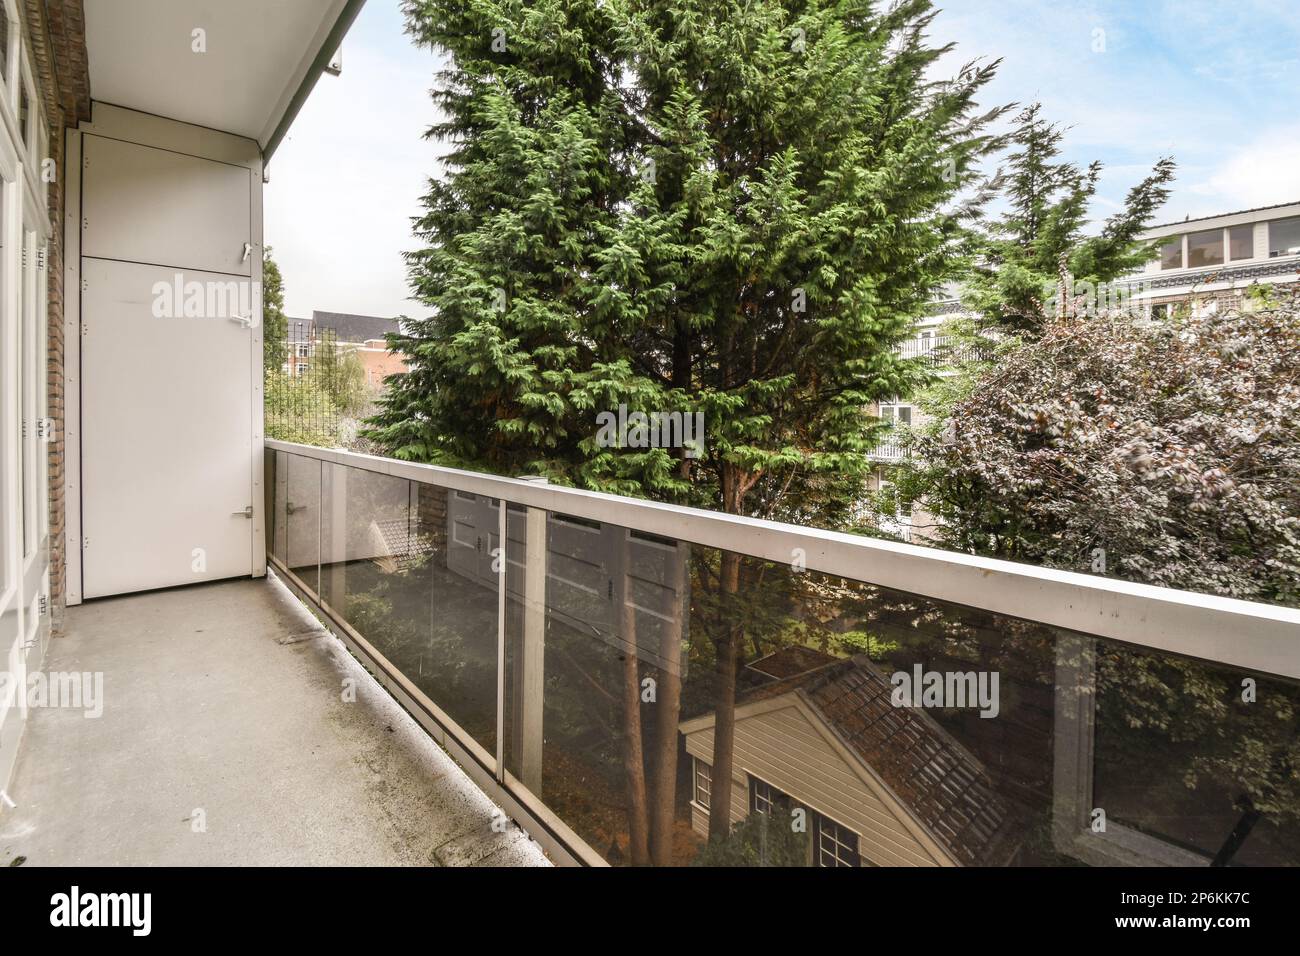 Amsterdam, Netherlands - 10 April, 2021: a balcony with a tree in the middle and some bushes on the other side, as well viewed from an apartment window Stock Photo